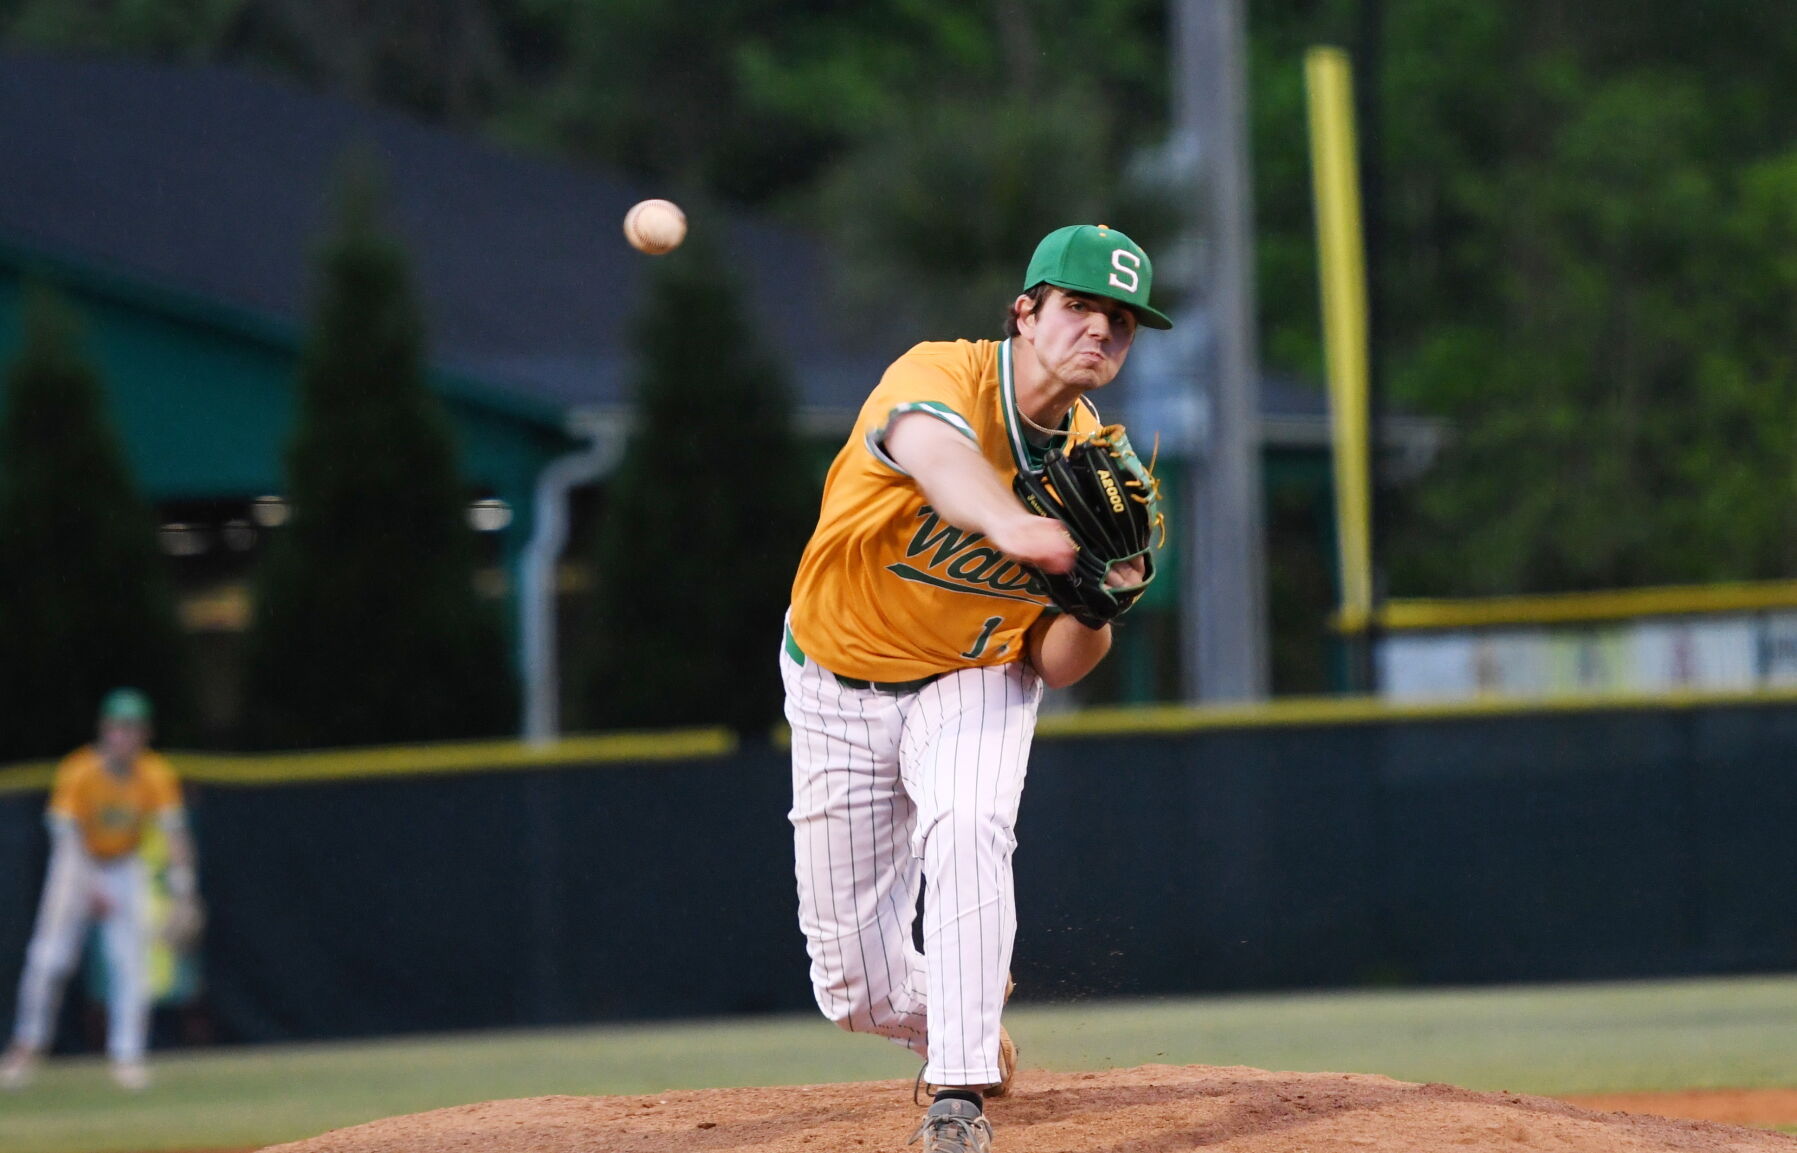 Summerville Secures Series Win Over West Ashley with Strong Defense and Pitching